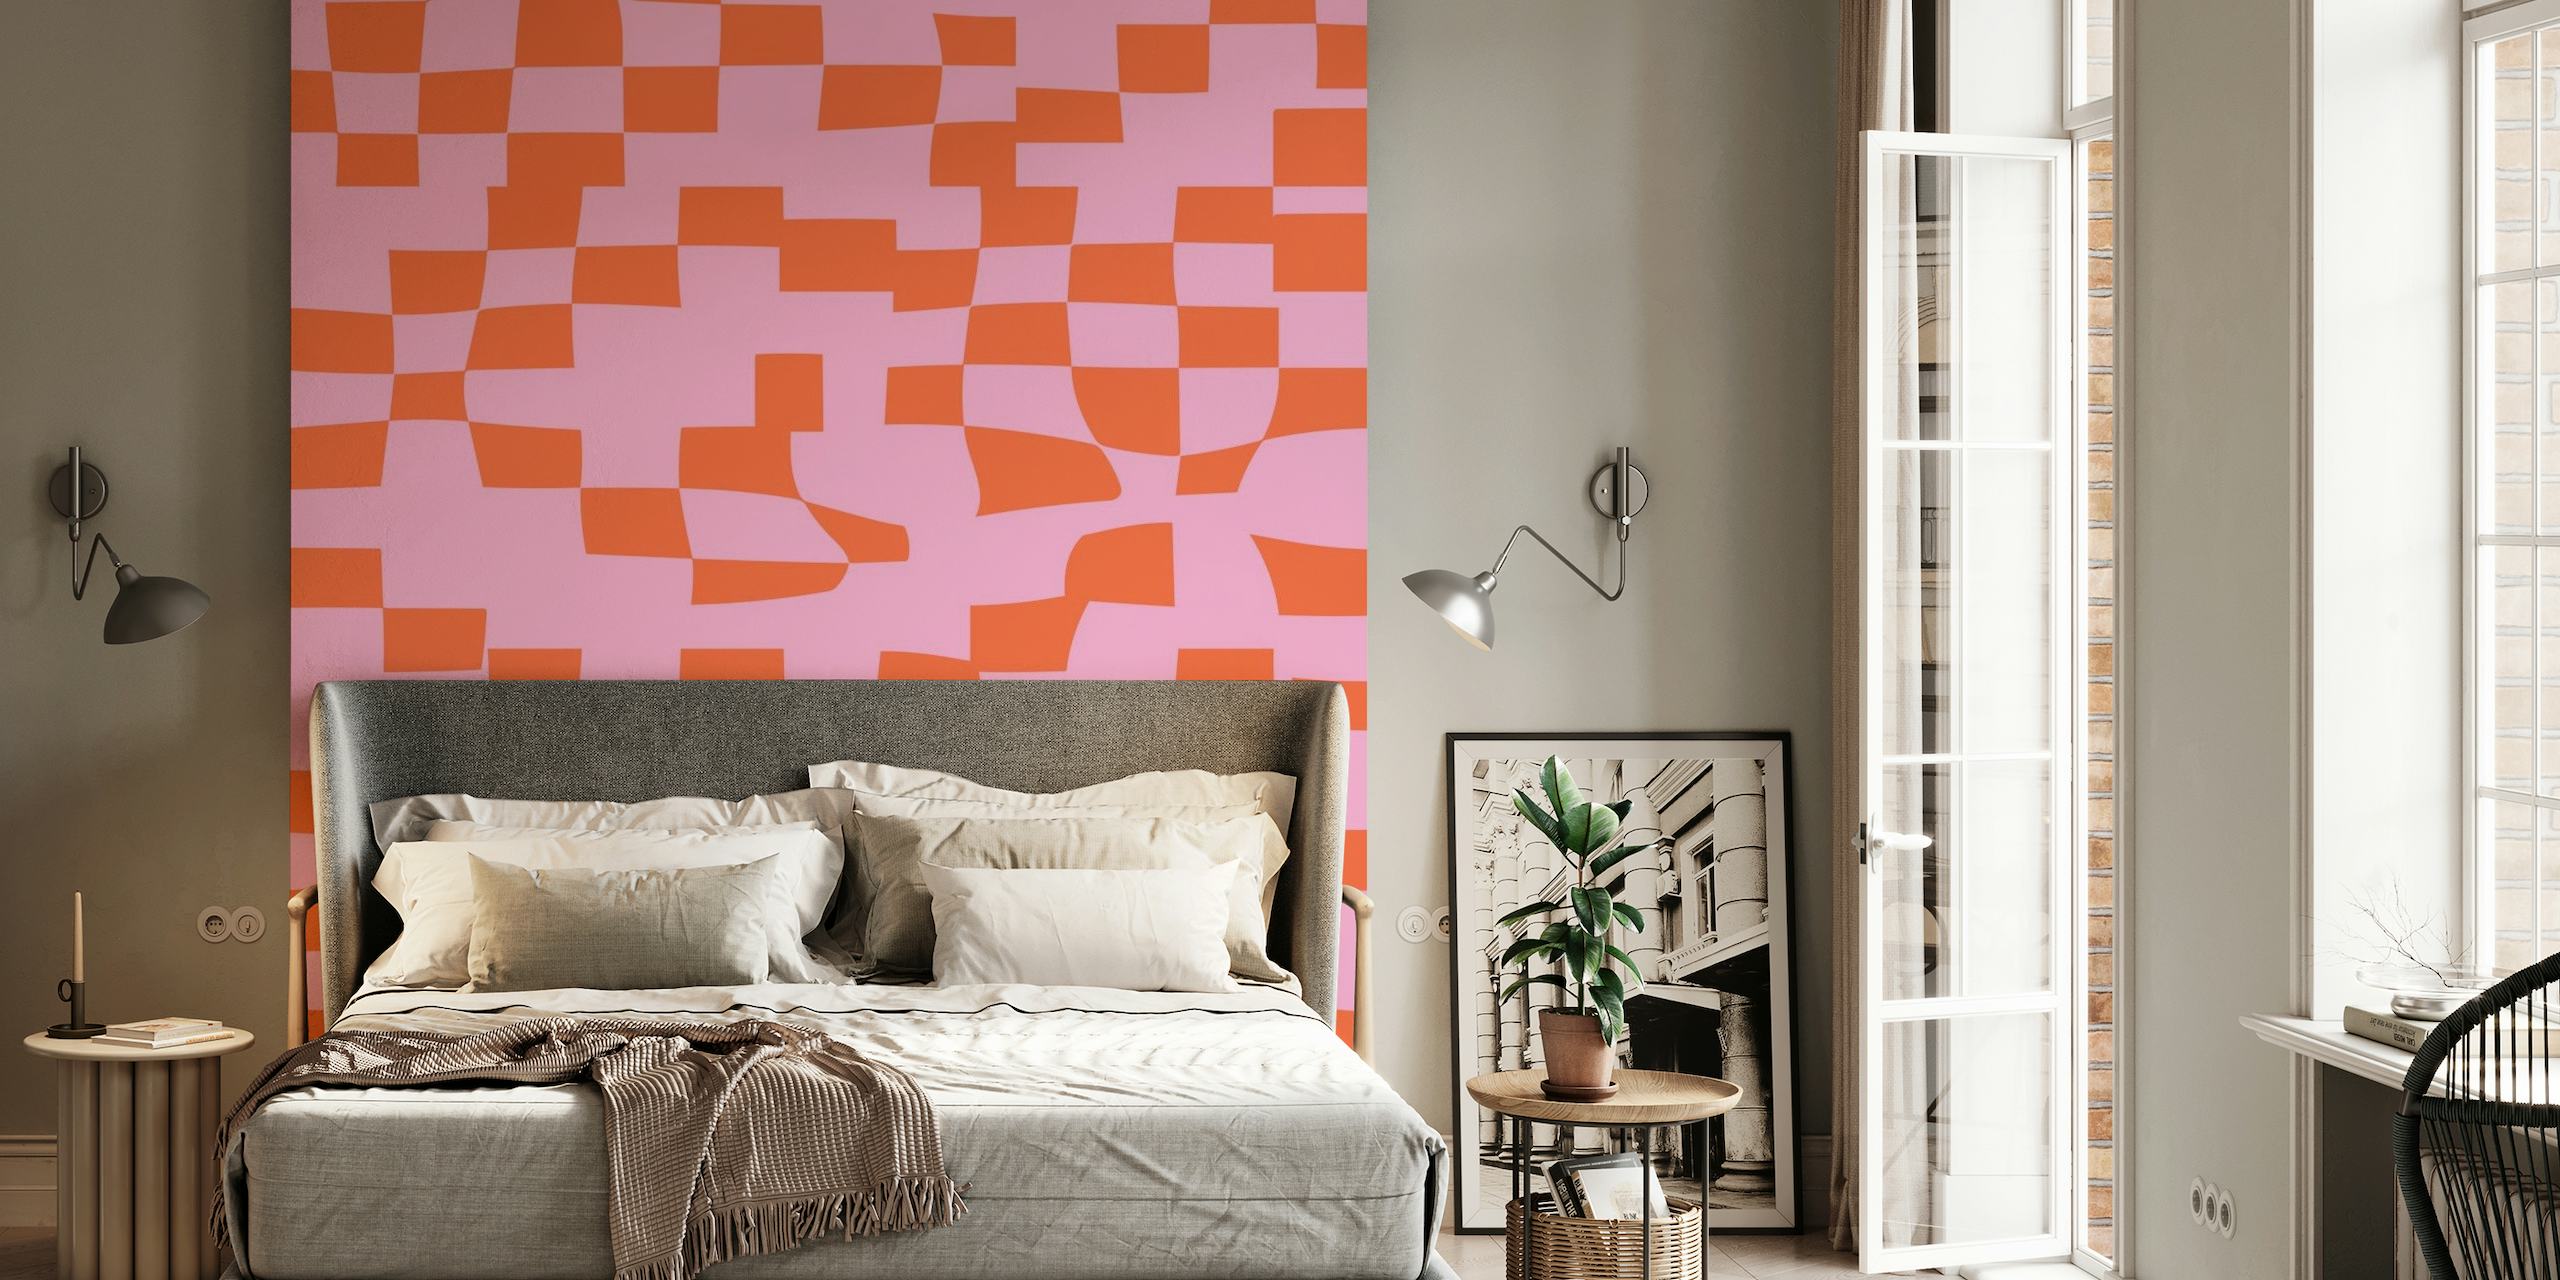 Abstract Checkerboard in Pink and Orange papiers peint